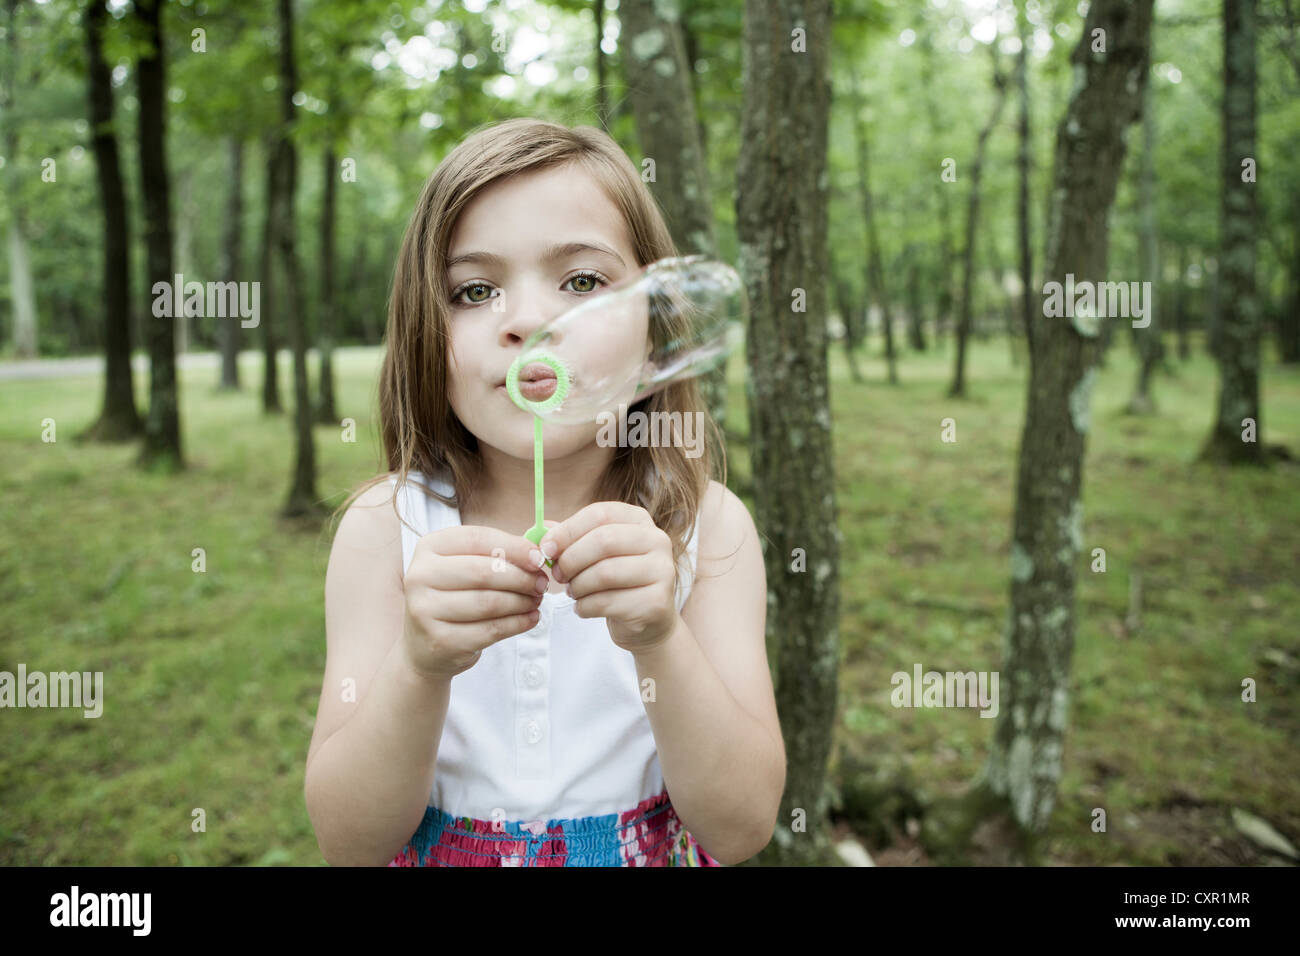 Girl blowing bubbles in forest Stock Photo